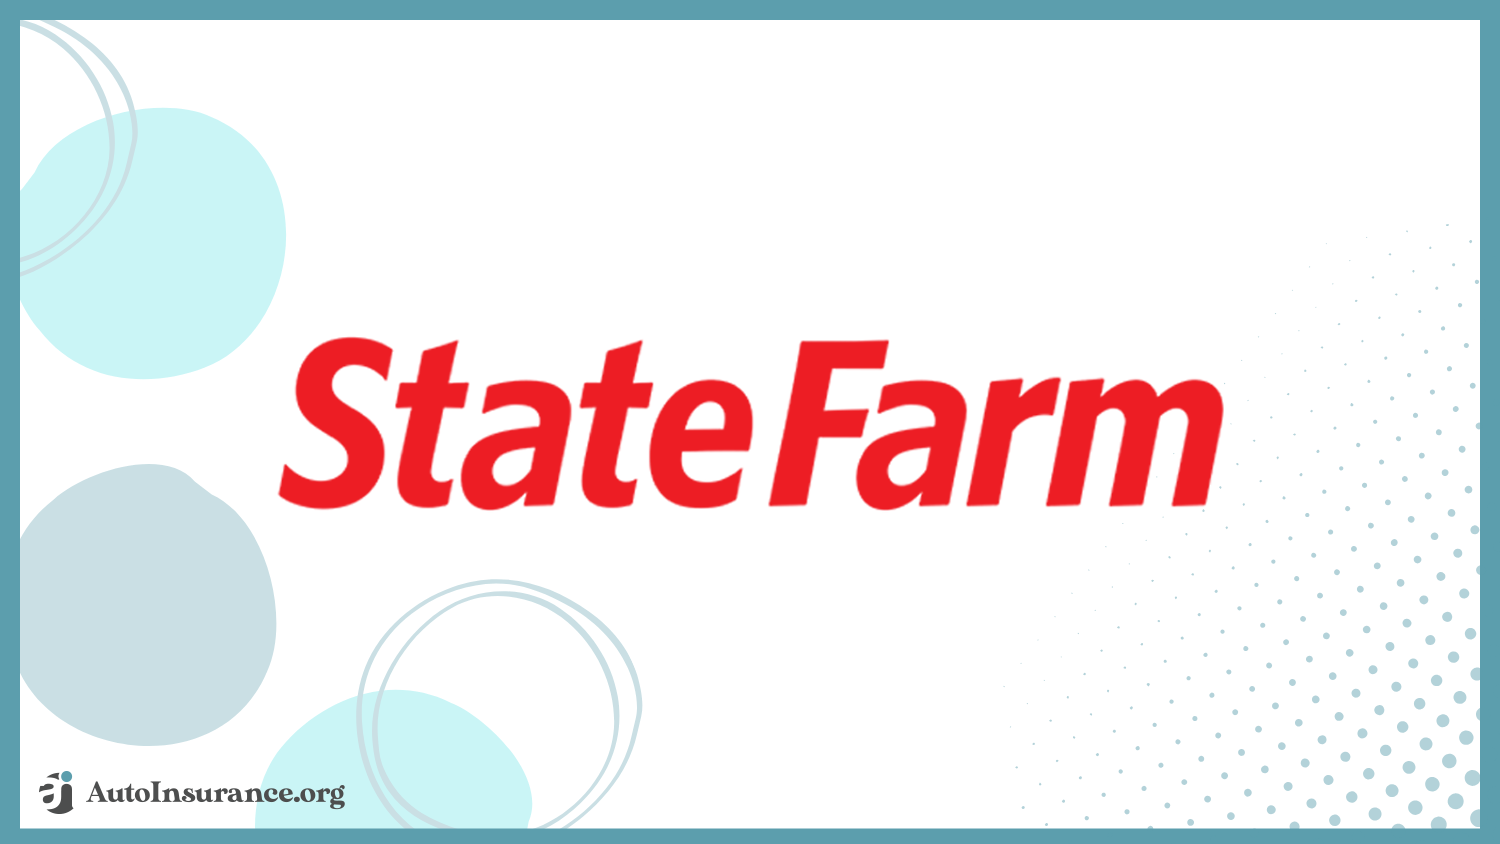 State Farm: Best Auto Insurance for Amputees